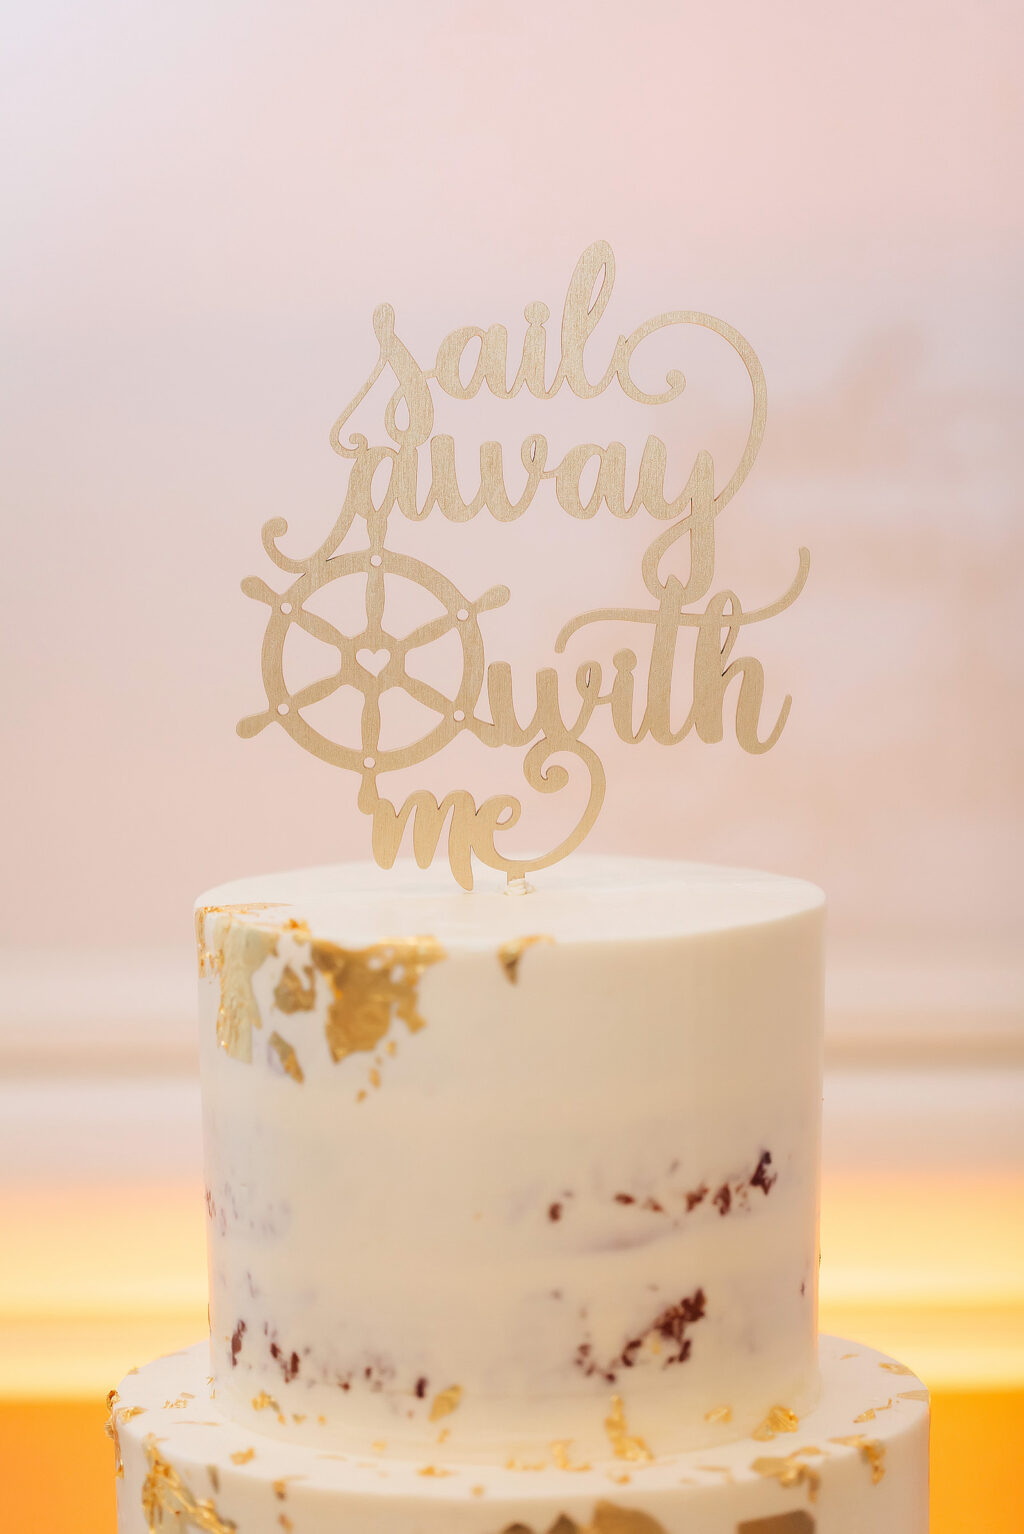 White and Gold Flake Semi Naked Wedding Cake with "Sail Away With Me" Laser Cut Cake Topper | Tampa Bay Wedding Photographer Limelight Photography